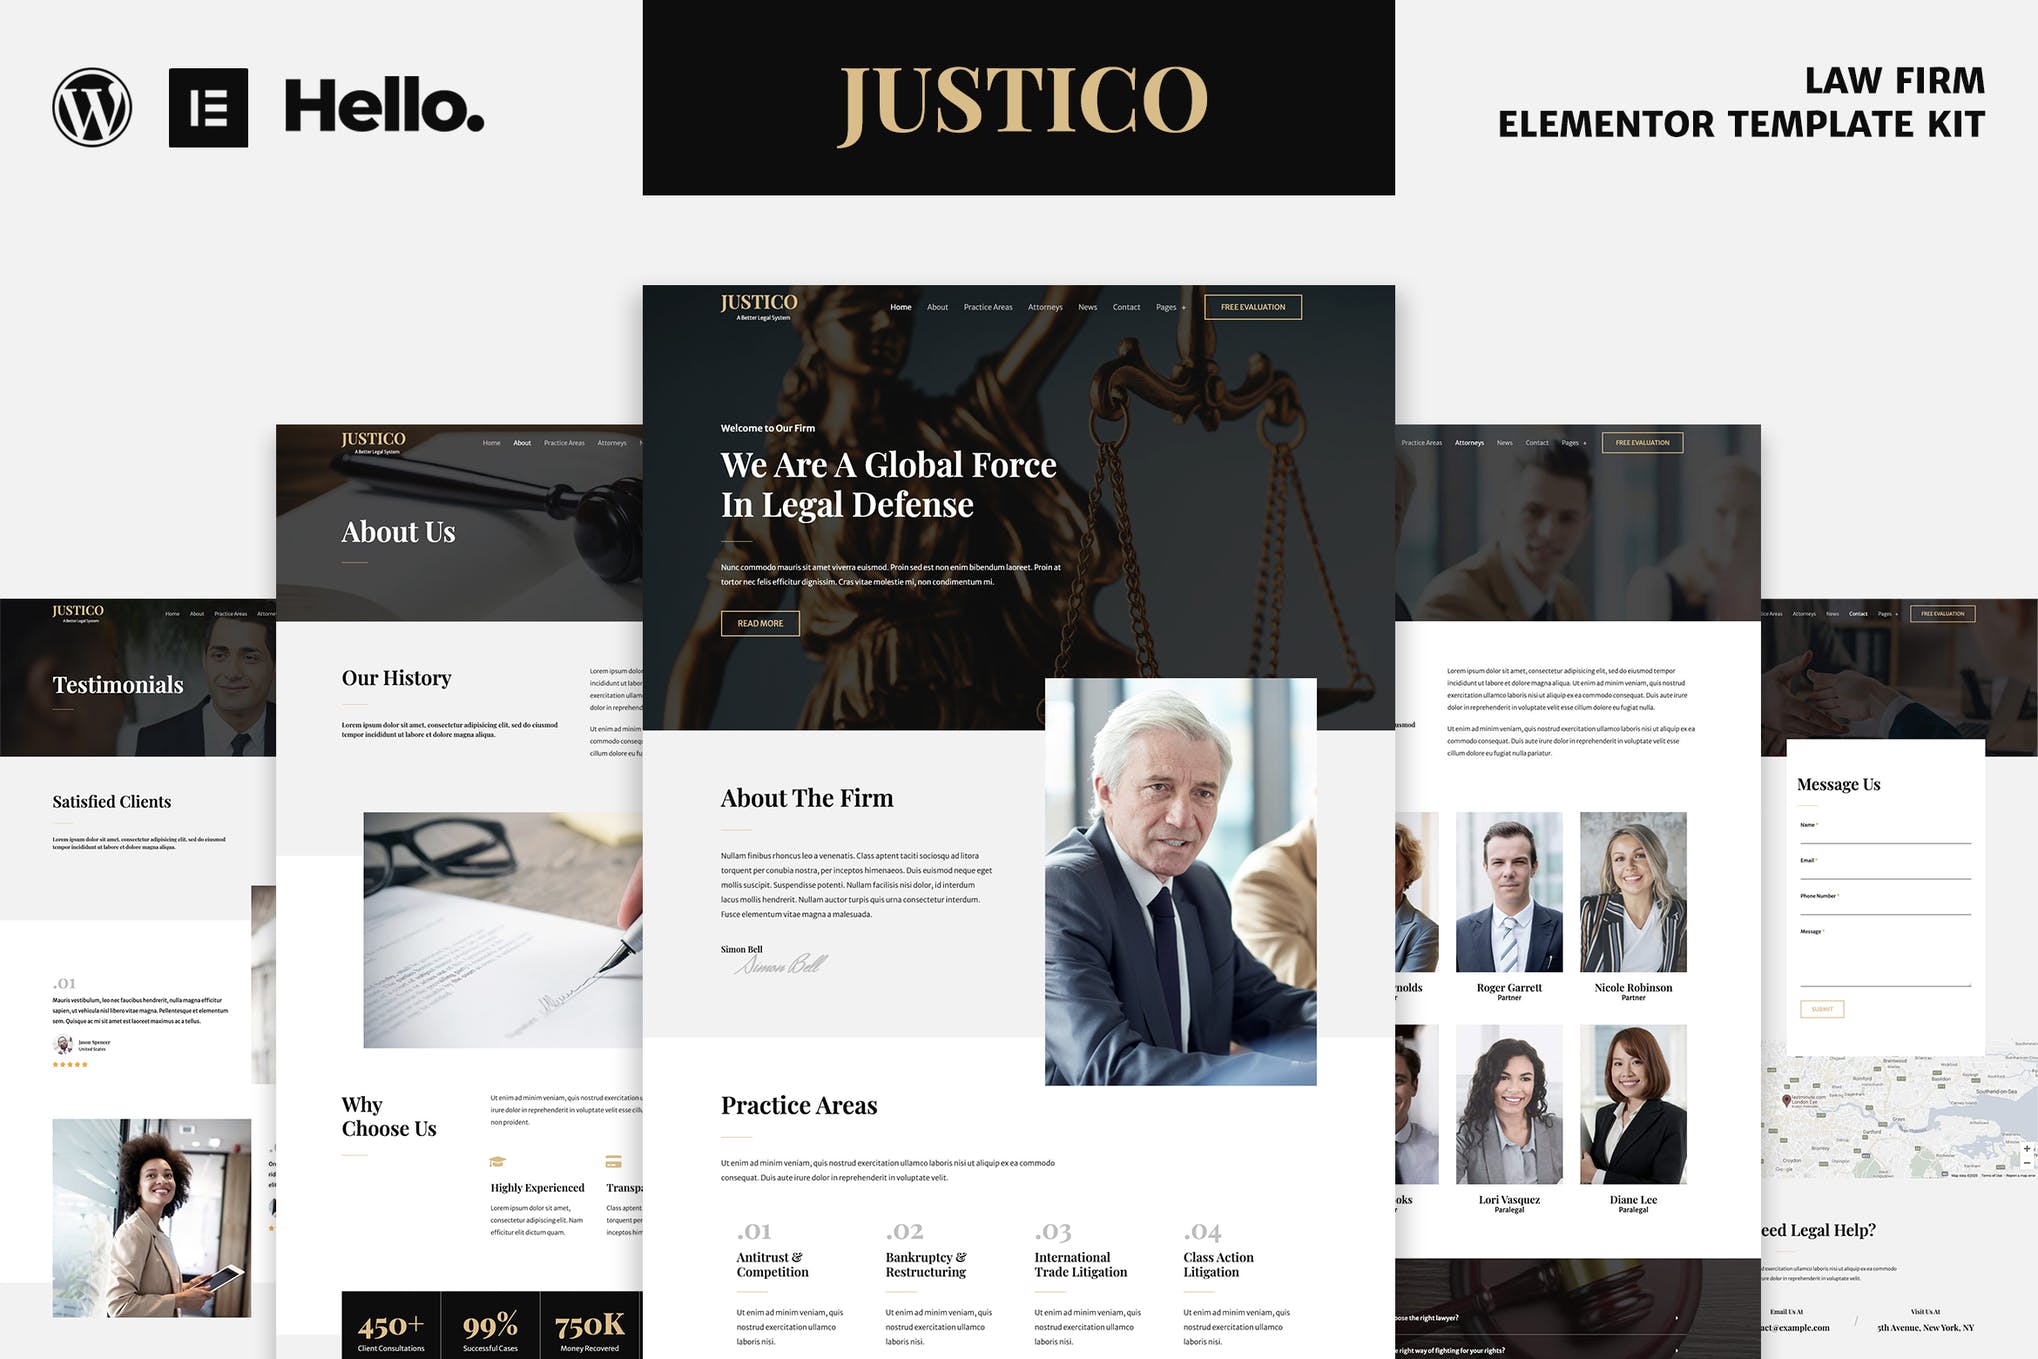 JUSTICO - Law Firm Elementor Template Kit